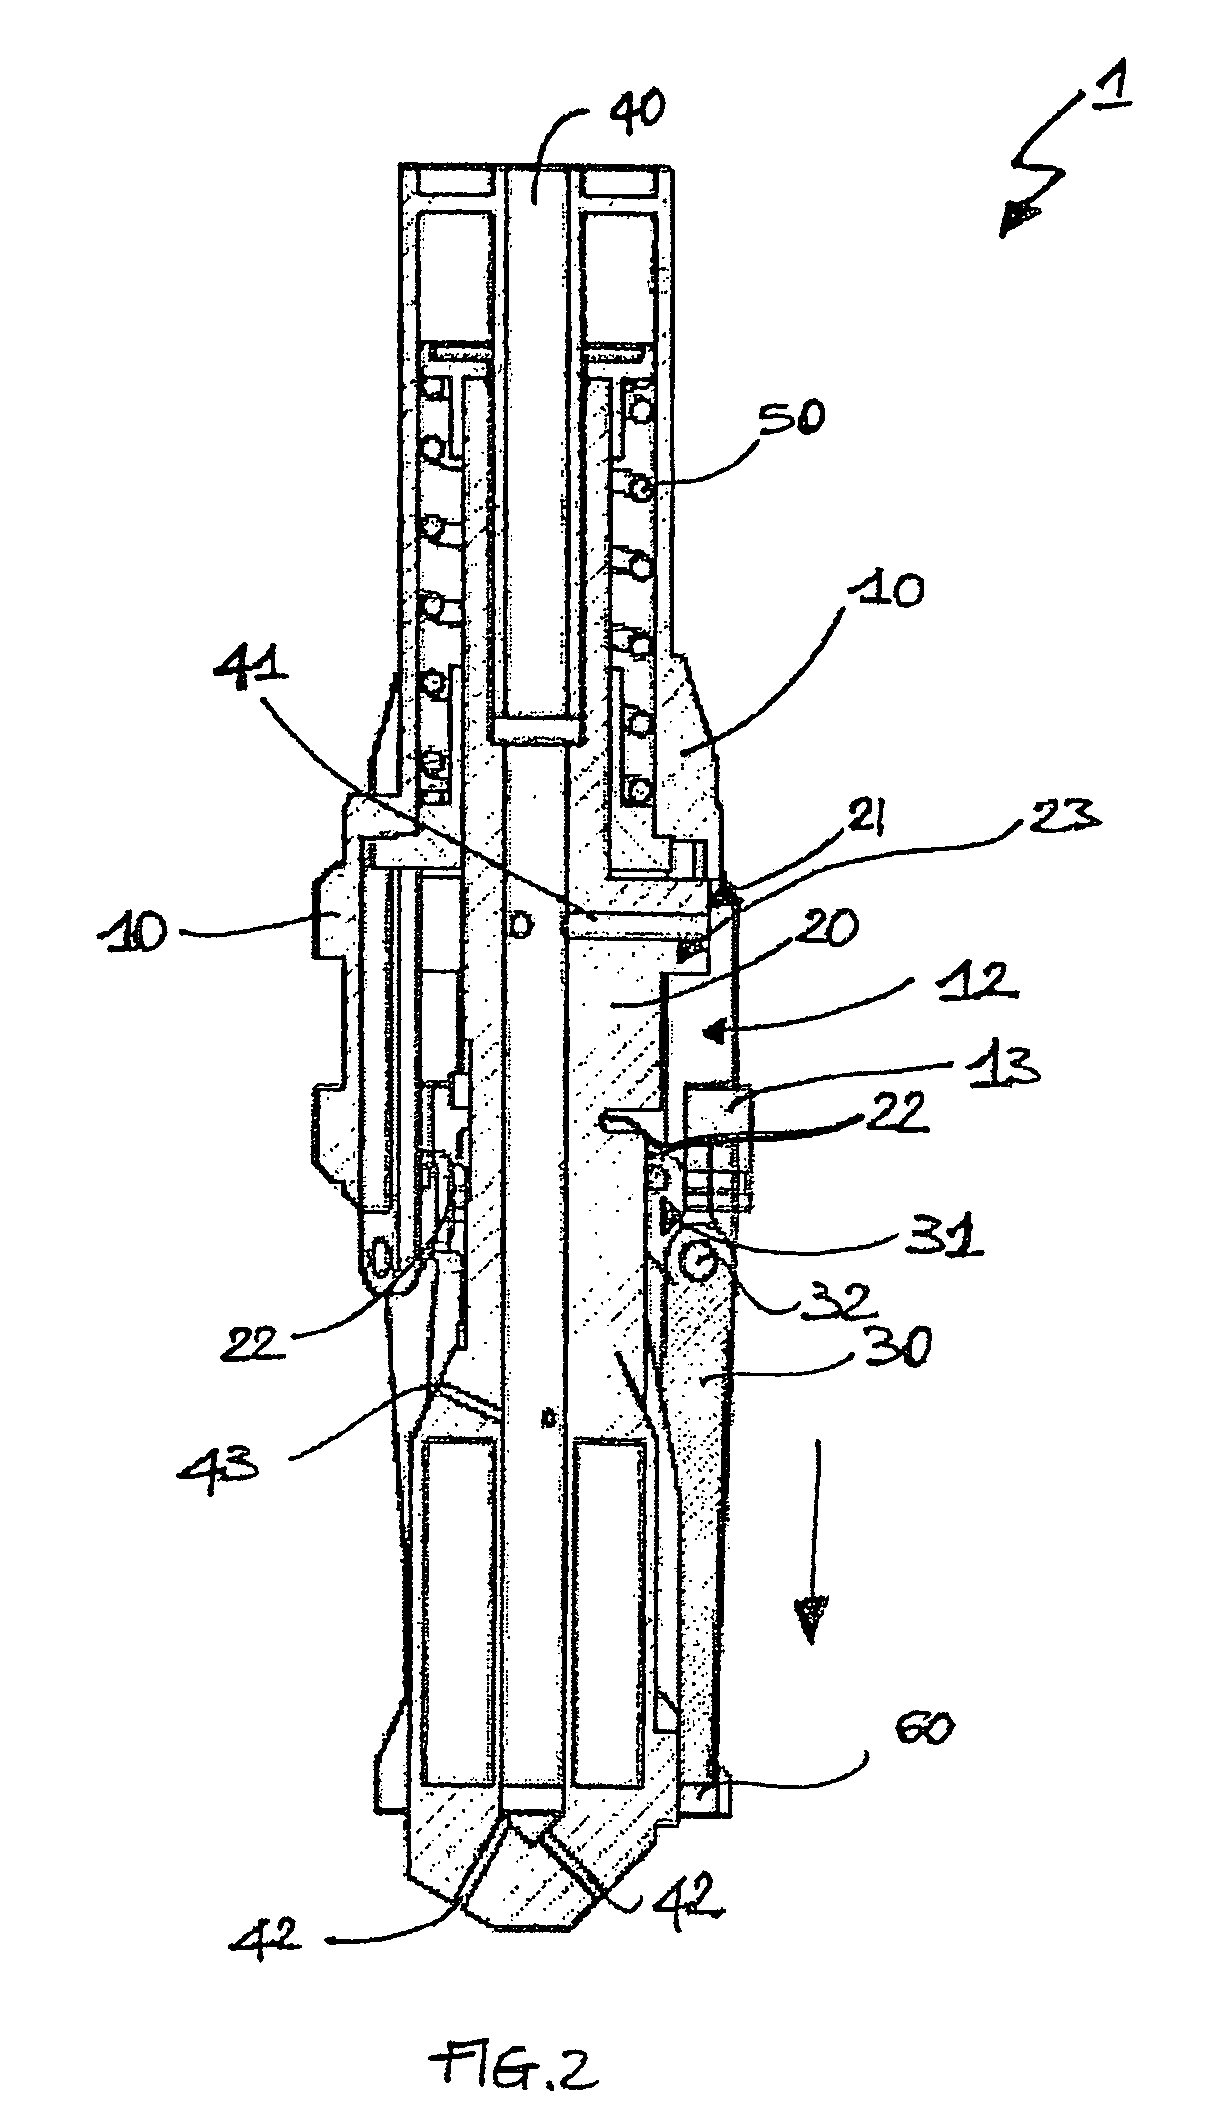 Device for consolidating soils by means of mechanical mixing and injection of consolidating fluids